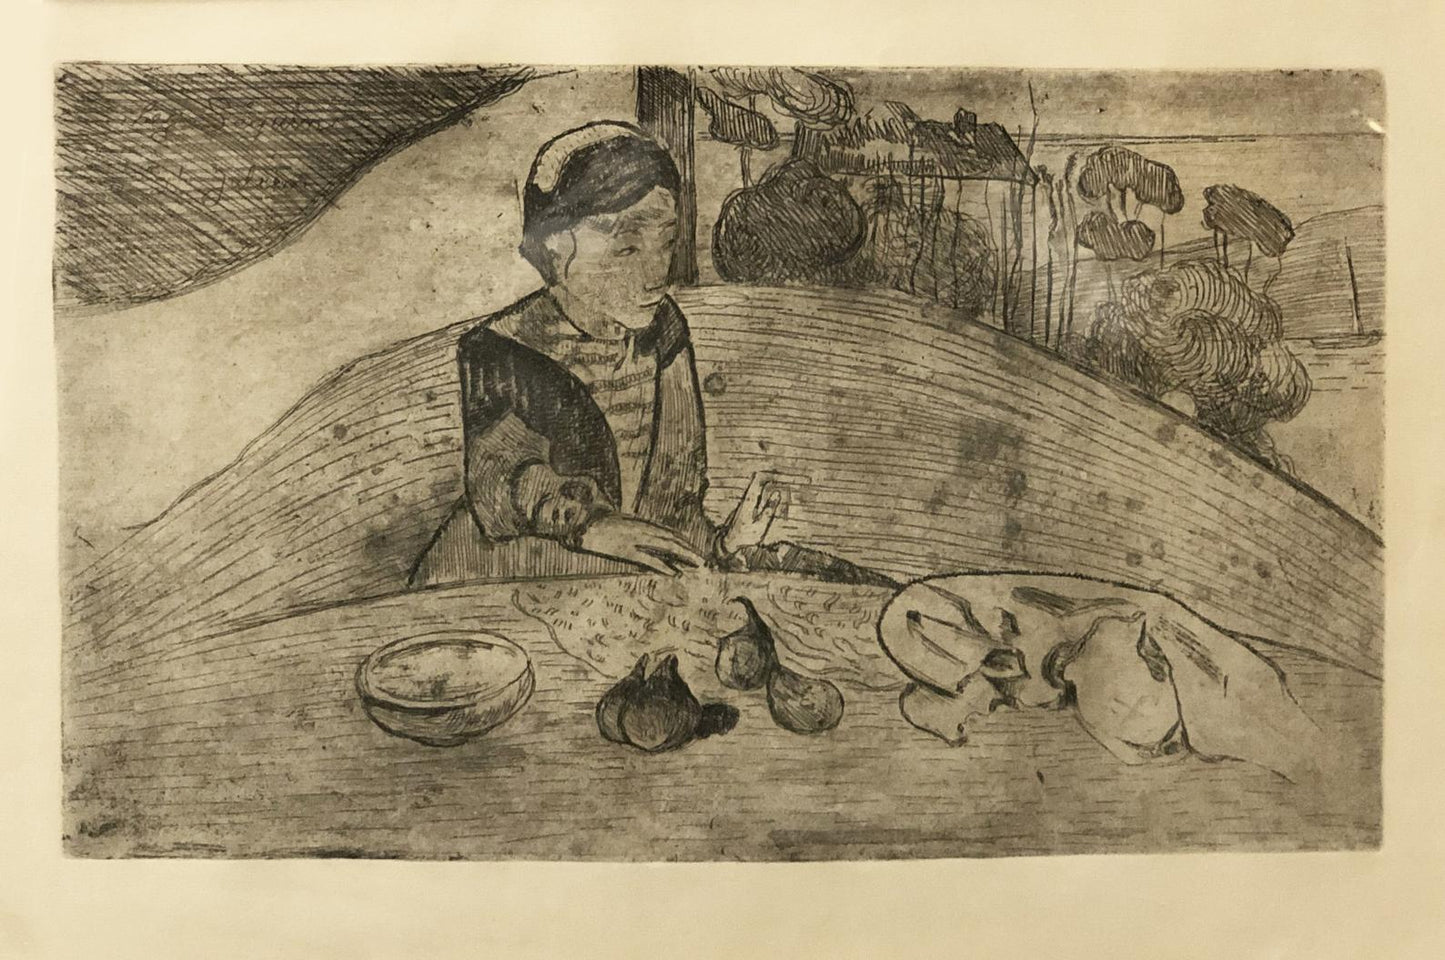 Armand Sequin/Paul Gaugin Etching: "Woman with Figs" (La femme aux figues)